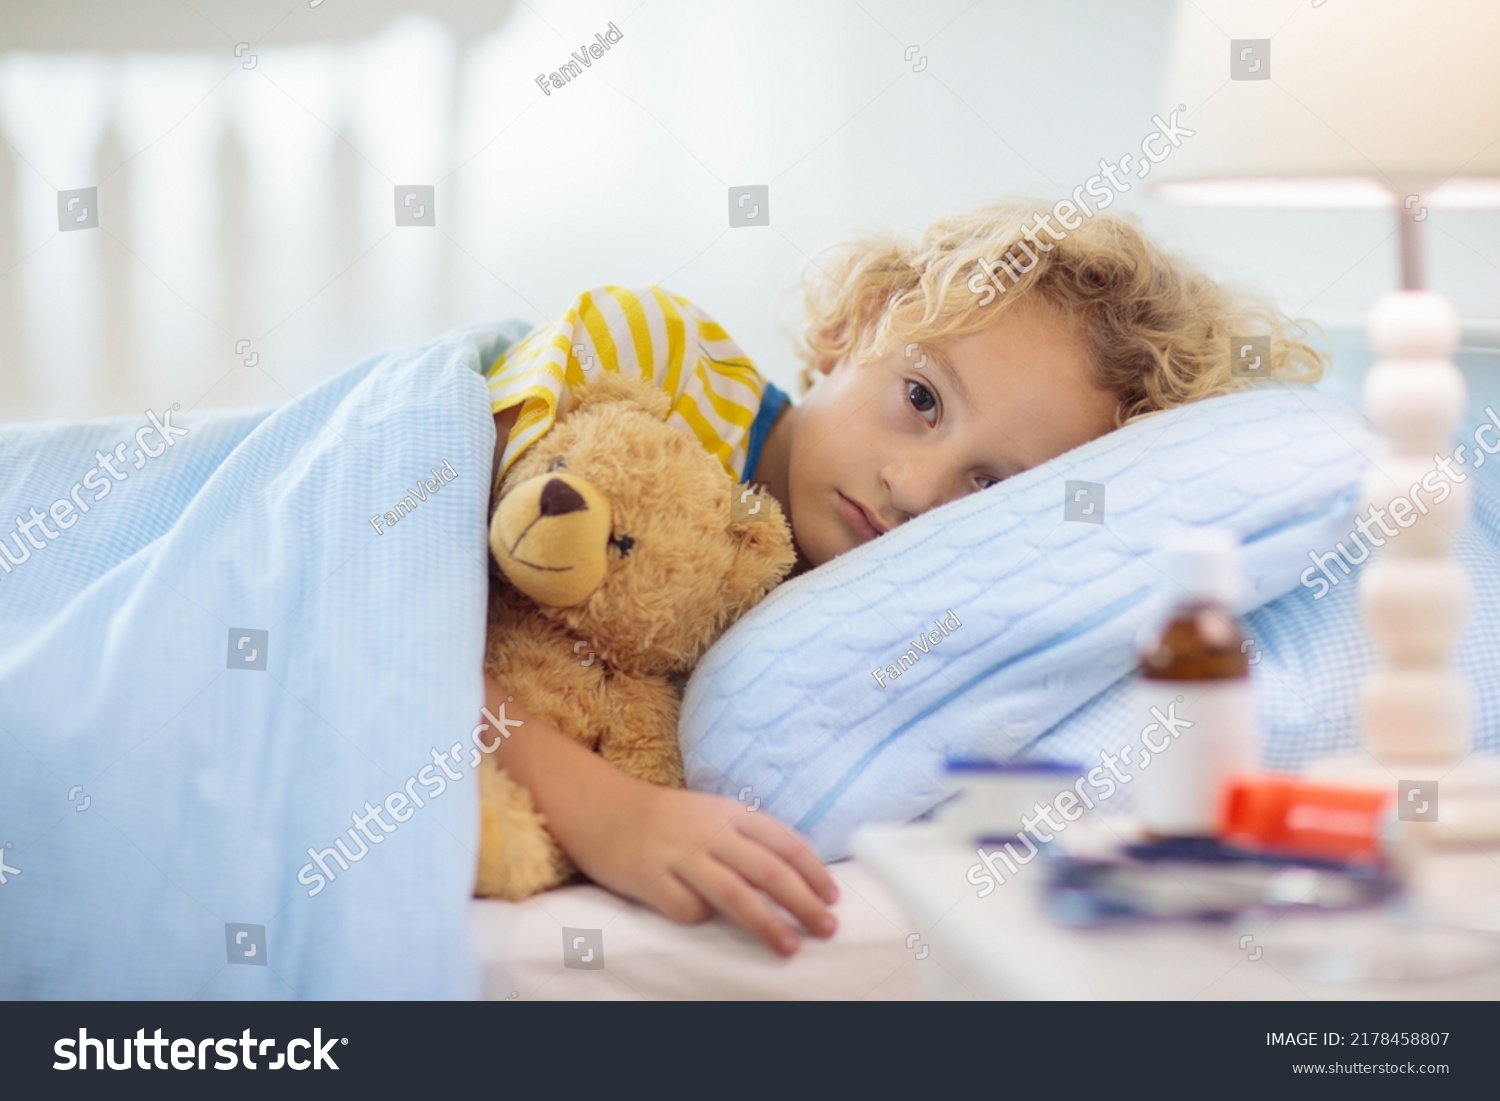 Sick little boy with asthma medicine. Ill child lying in bed. Unwell kid with chamber inhaler for cough treatment. Flu season. Bedroom or hospital room for young patient. Healthcare and medication. #2178458807